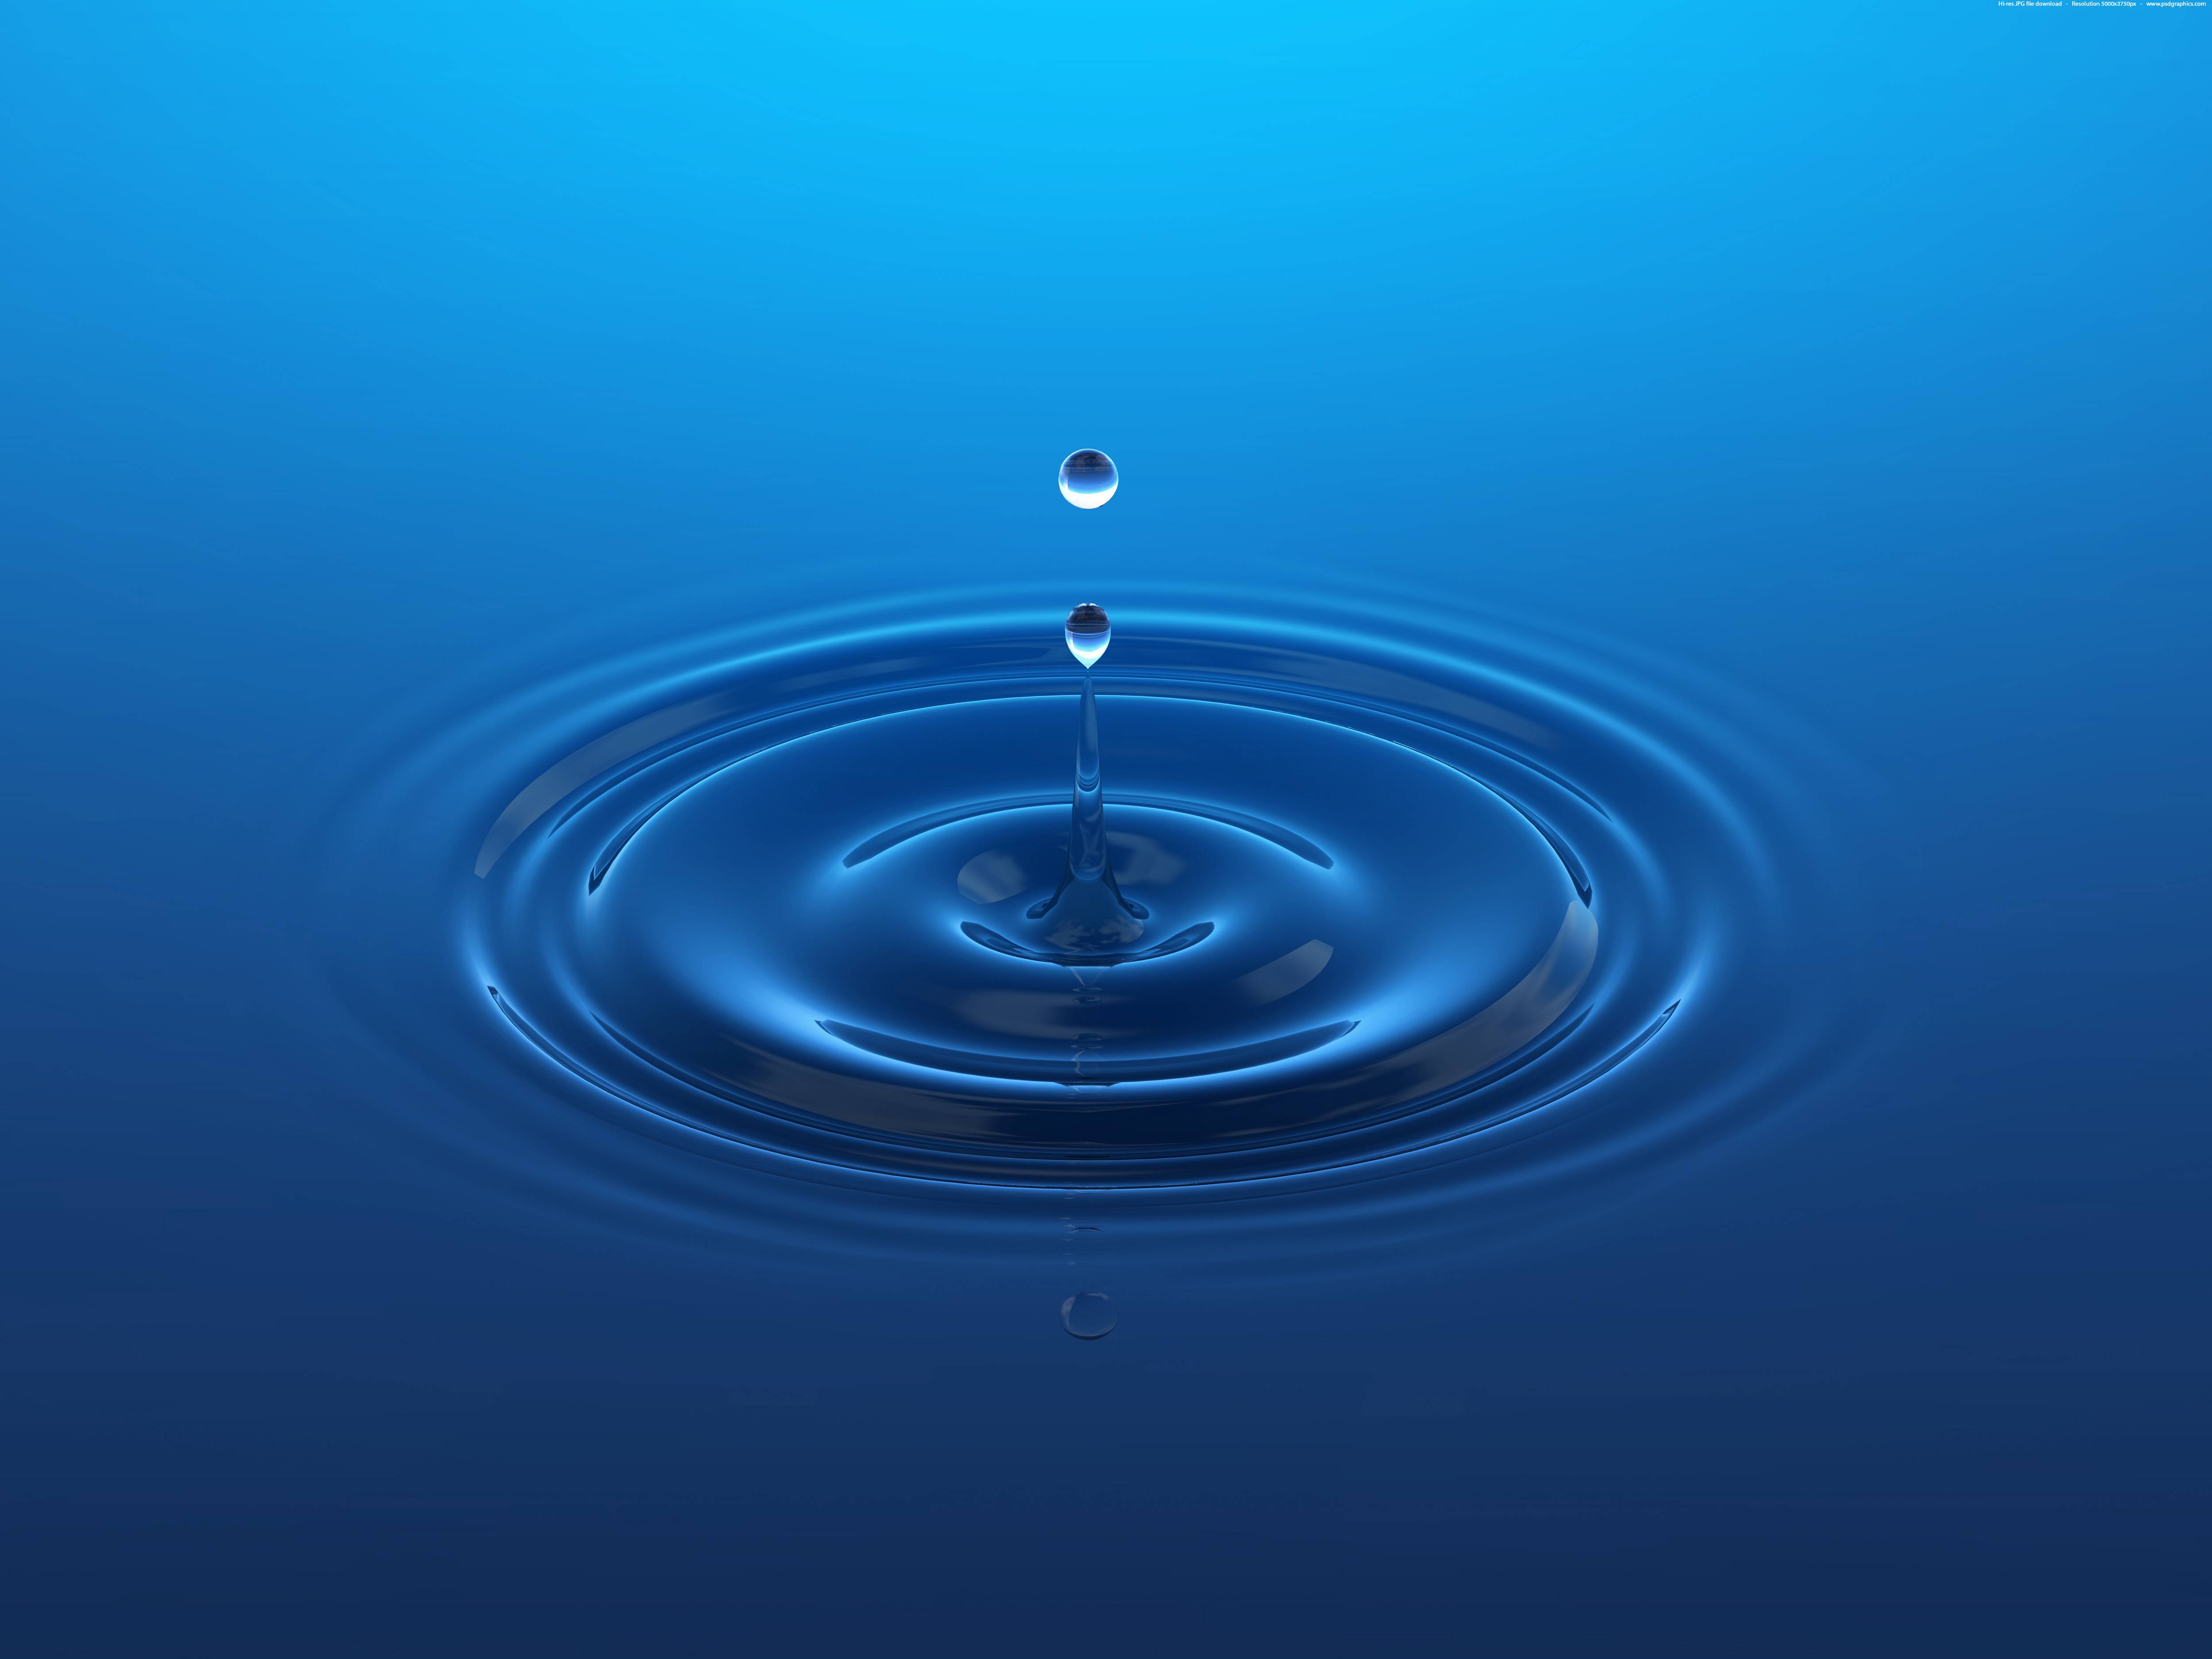 Blue water drop background